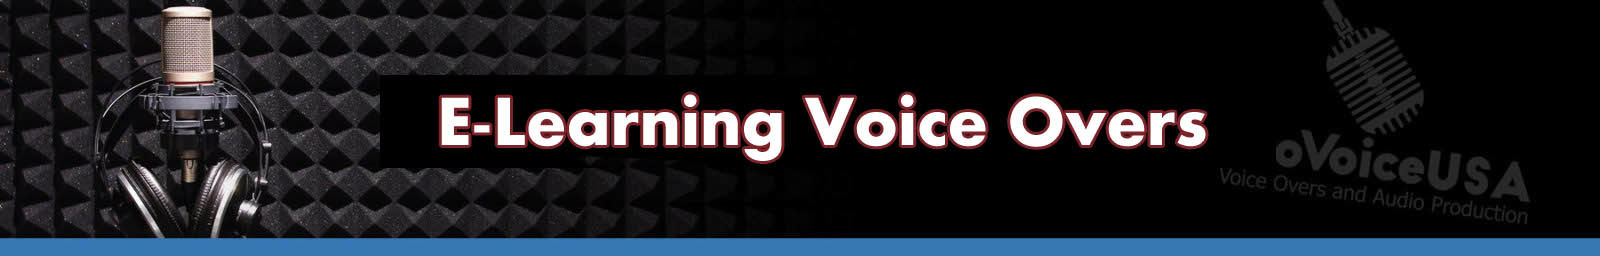 E Learning and Training Voice Overs header